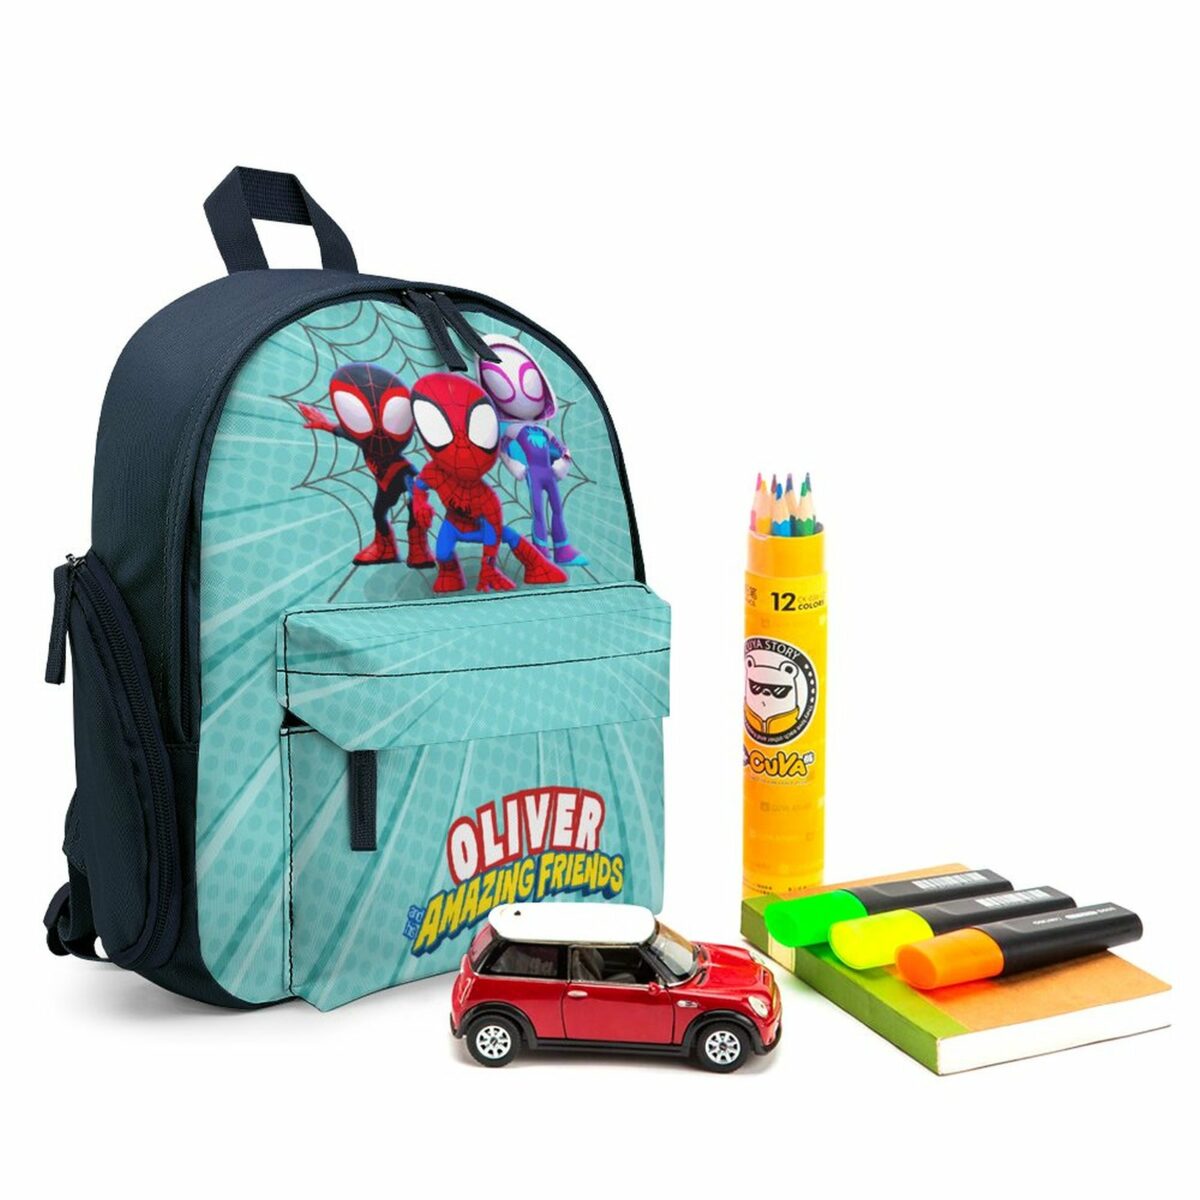 Spidey and his Amazing Friends Children’s Blue School Bag – Personalized Toddler’s Backpack Cool Kiddo 14